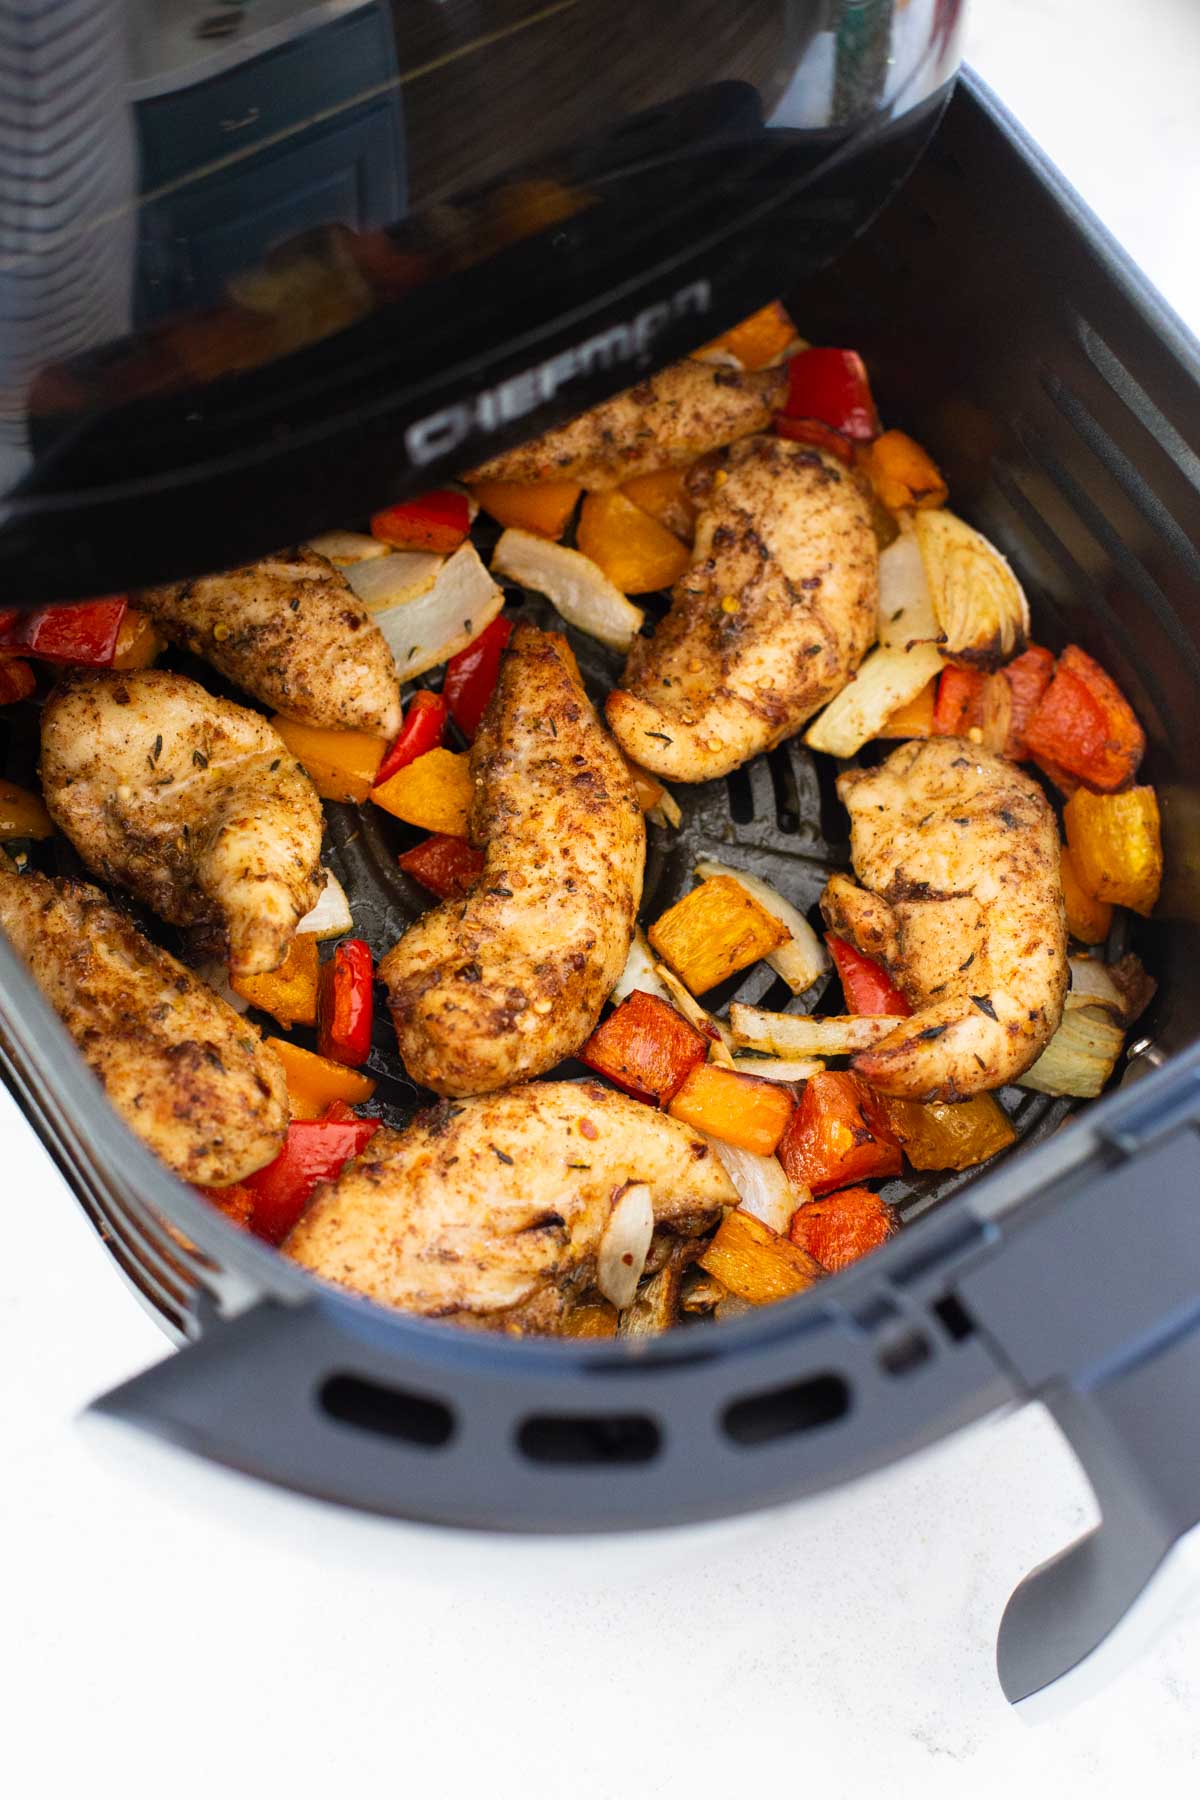 The air fryer basket has been pulled open to show the cooked jerk chicken and peppers.